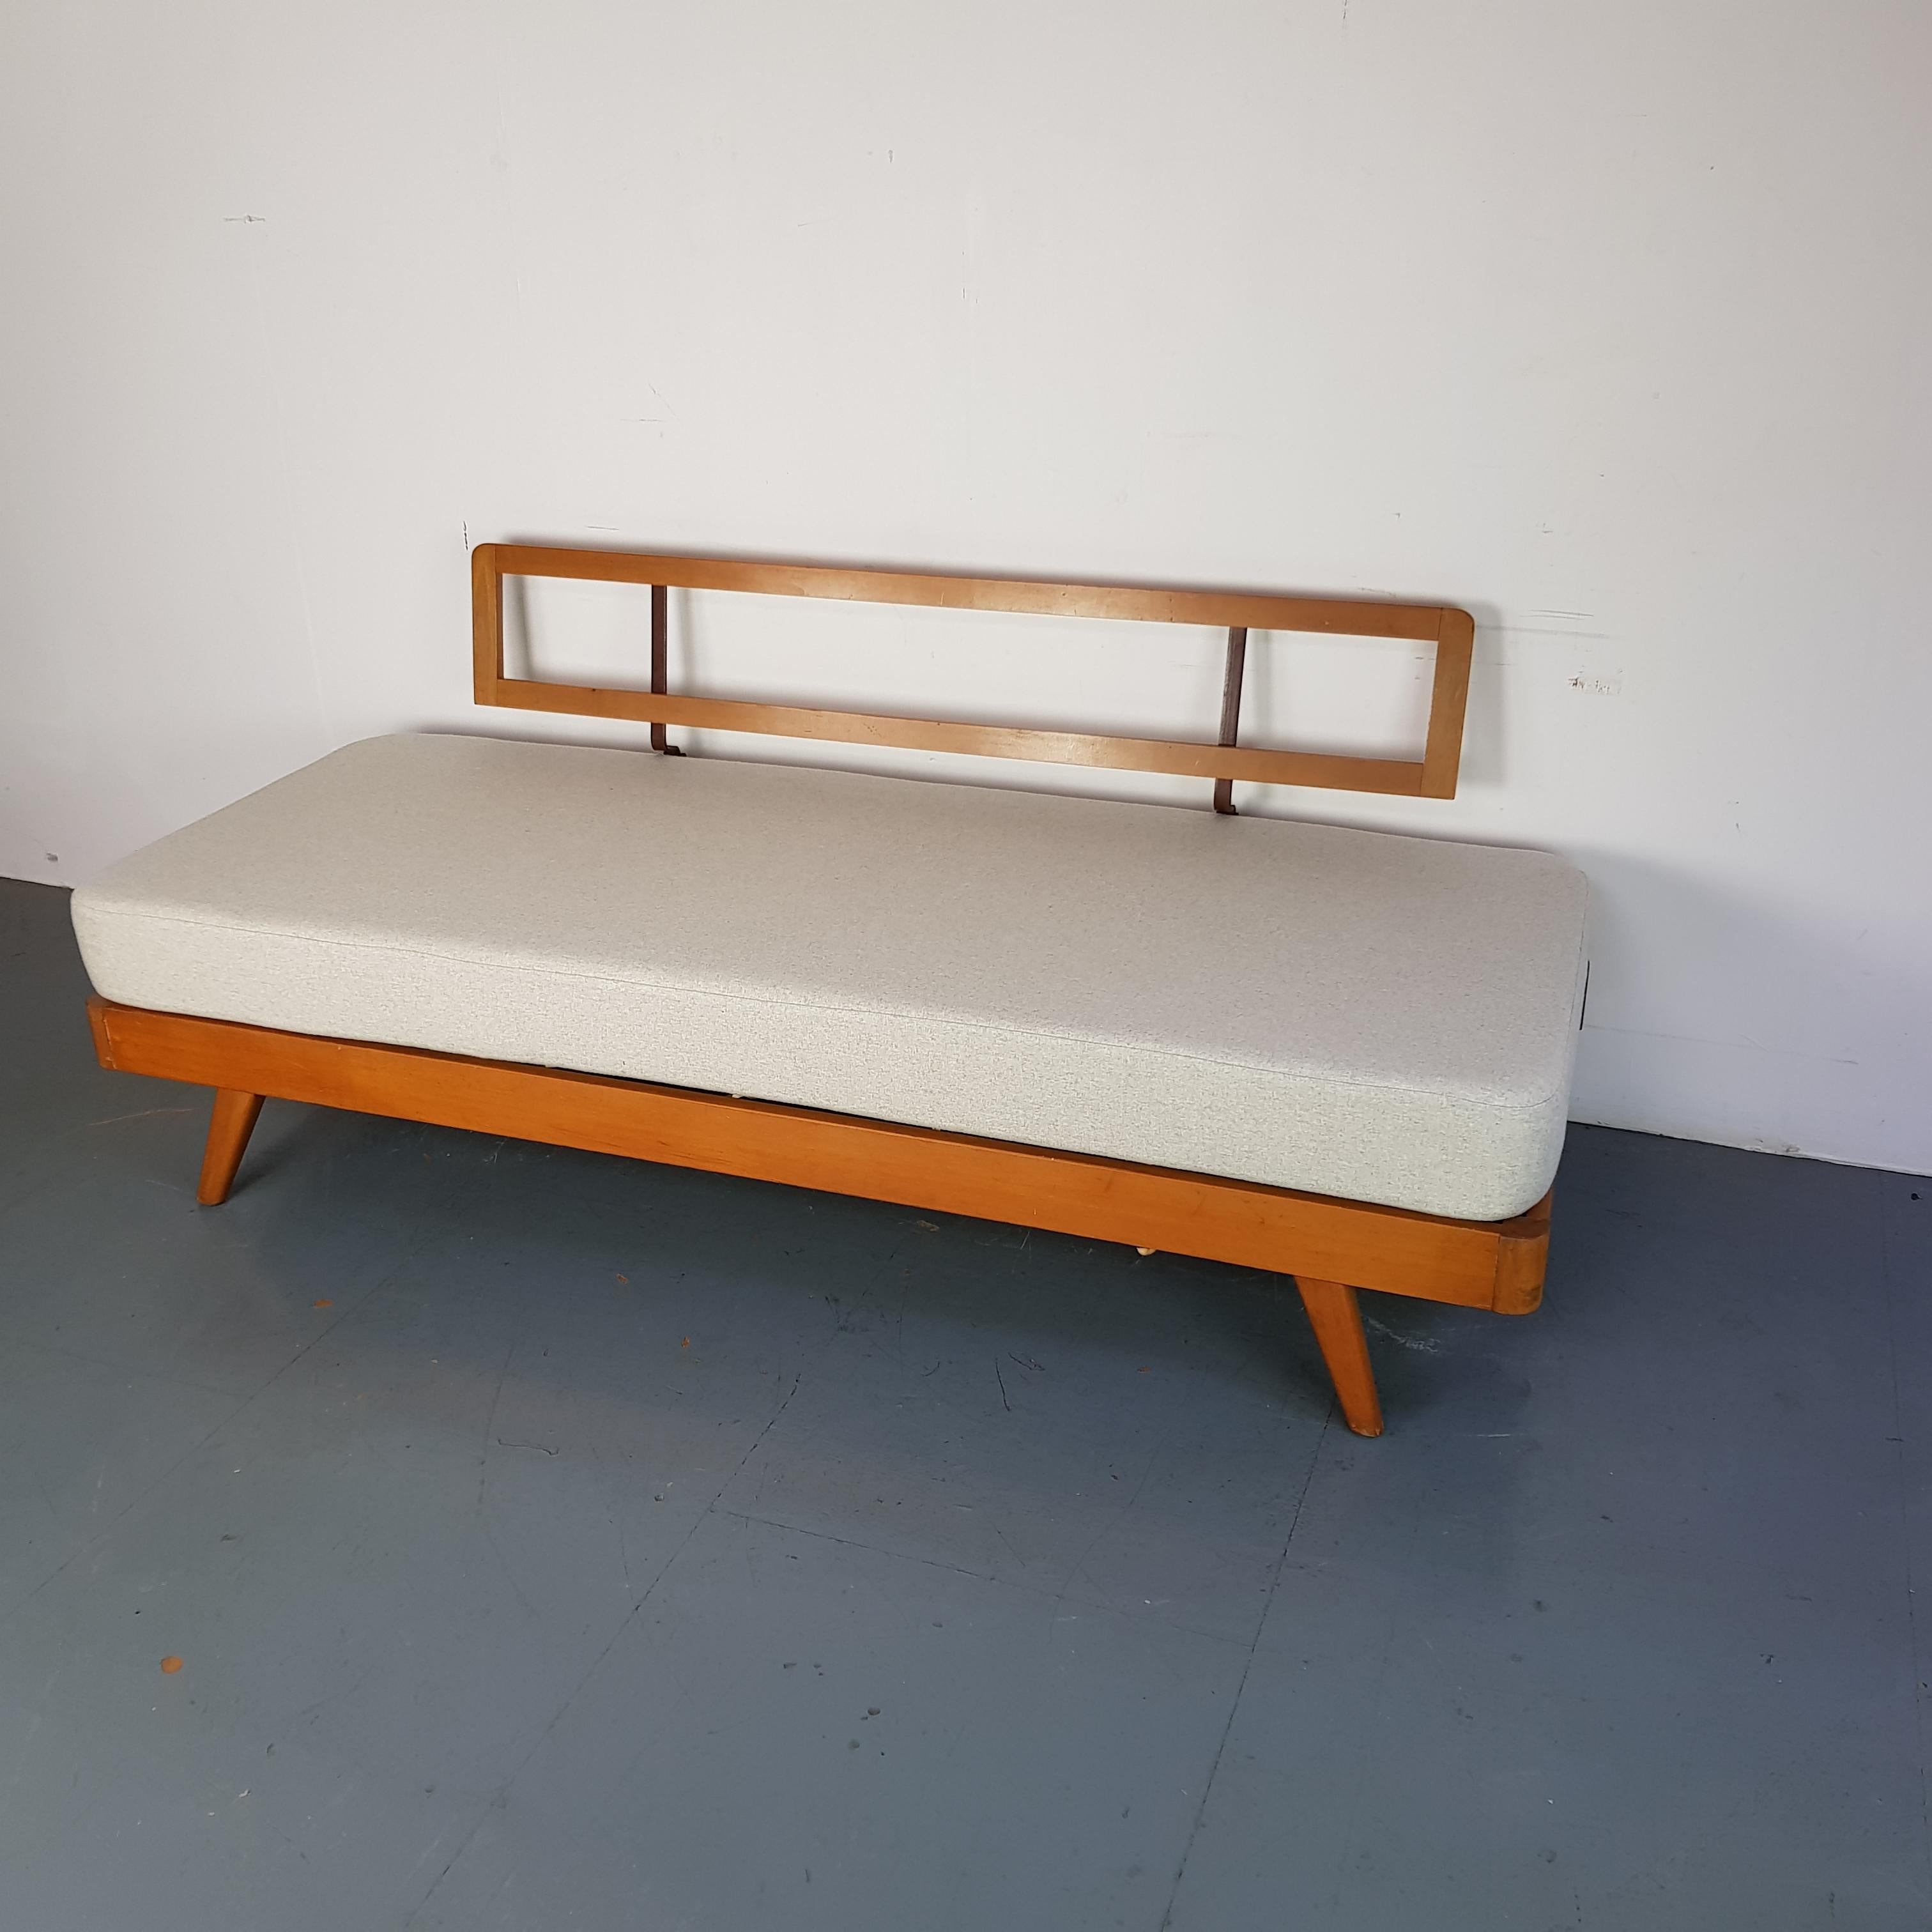 Vintage Danish Midcentury Three-Seat Daybed In Good Condition For Sale In Lewes, East Sussex